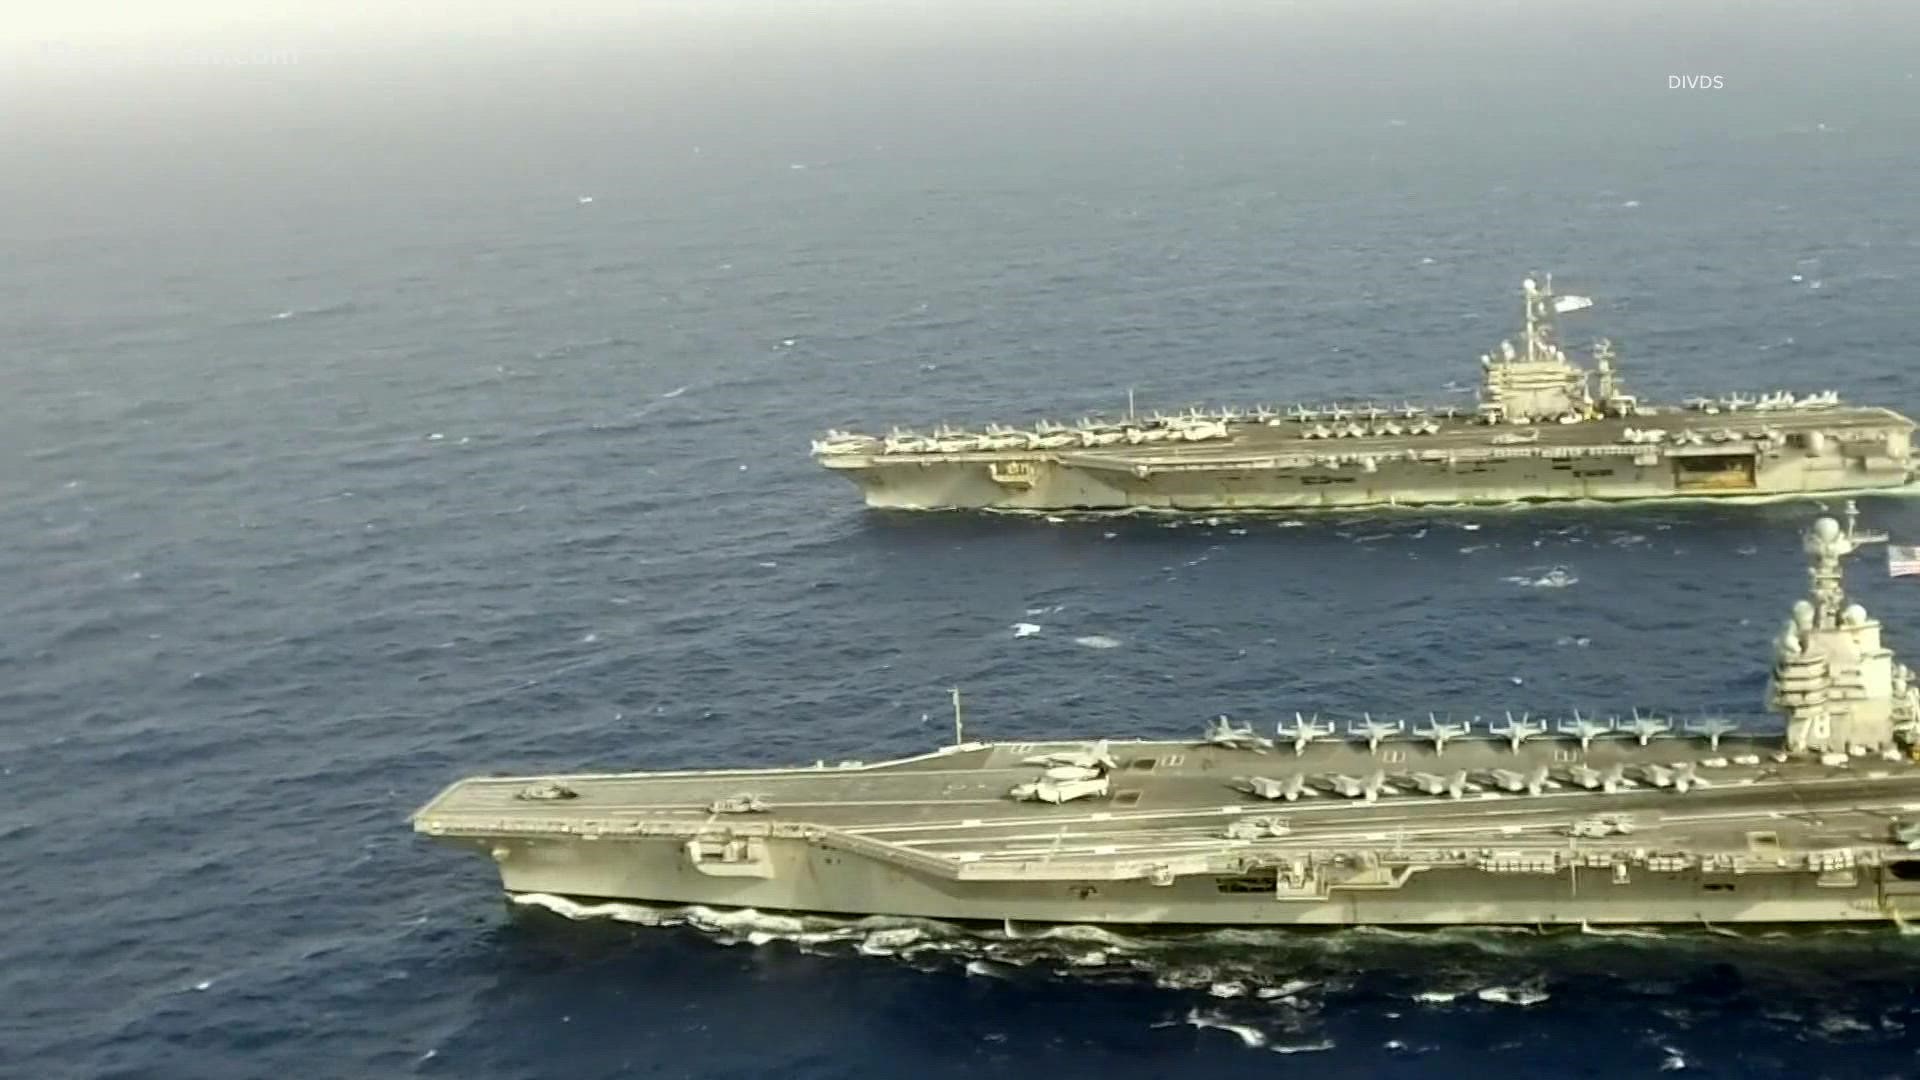 Congress OK'd a "block-buy" for the next two Gerald R. Ford-class aircraft carriers: the Enterprise and the Doris Miller.